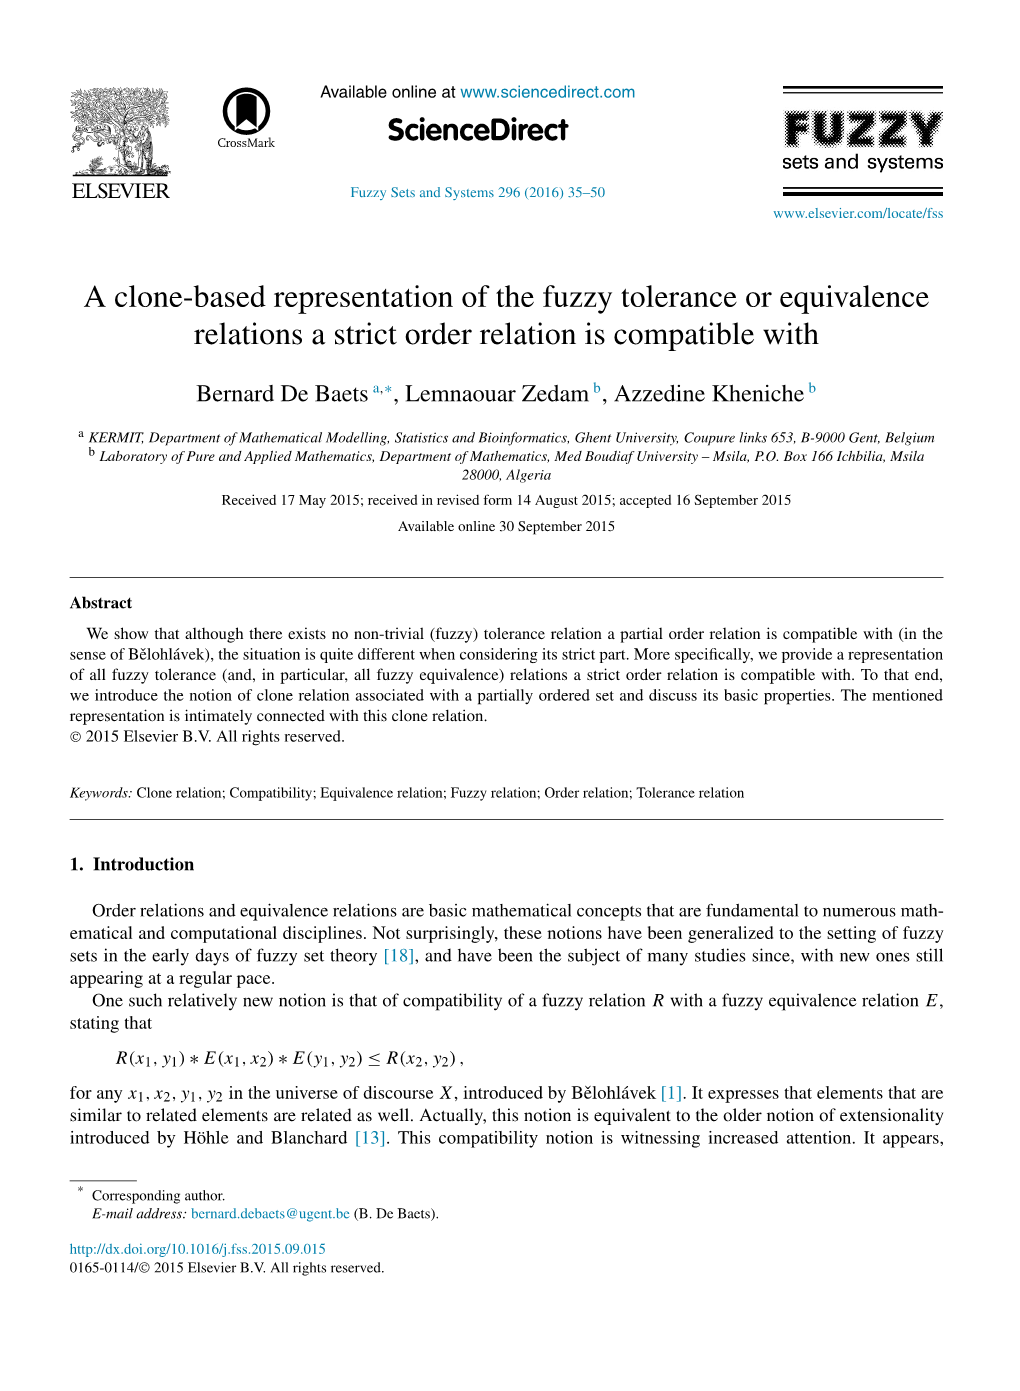 A Clone-Based Representation of the Fuzzy Tolerance Or Equivalence Relations a Strict Order Relation Is Compatible With